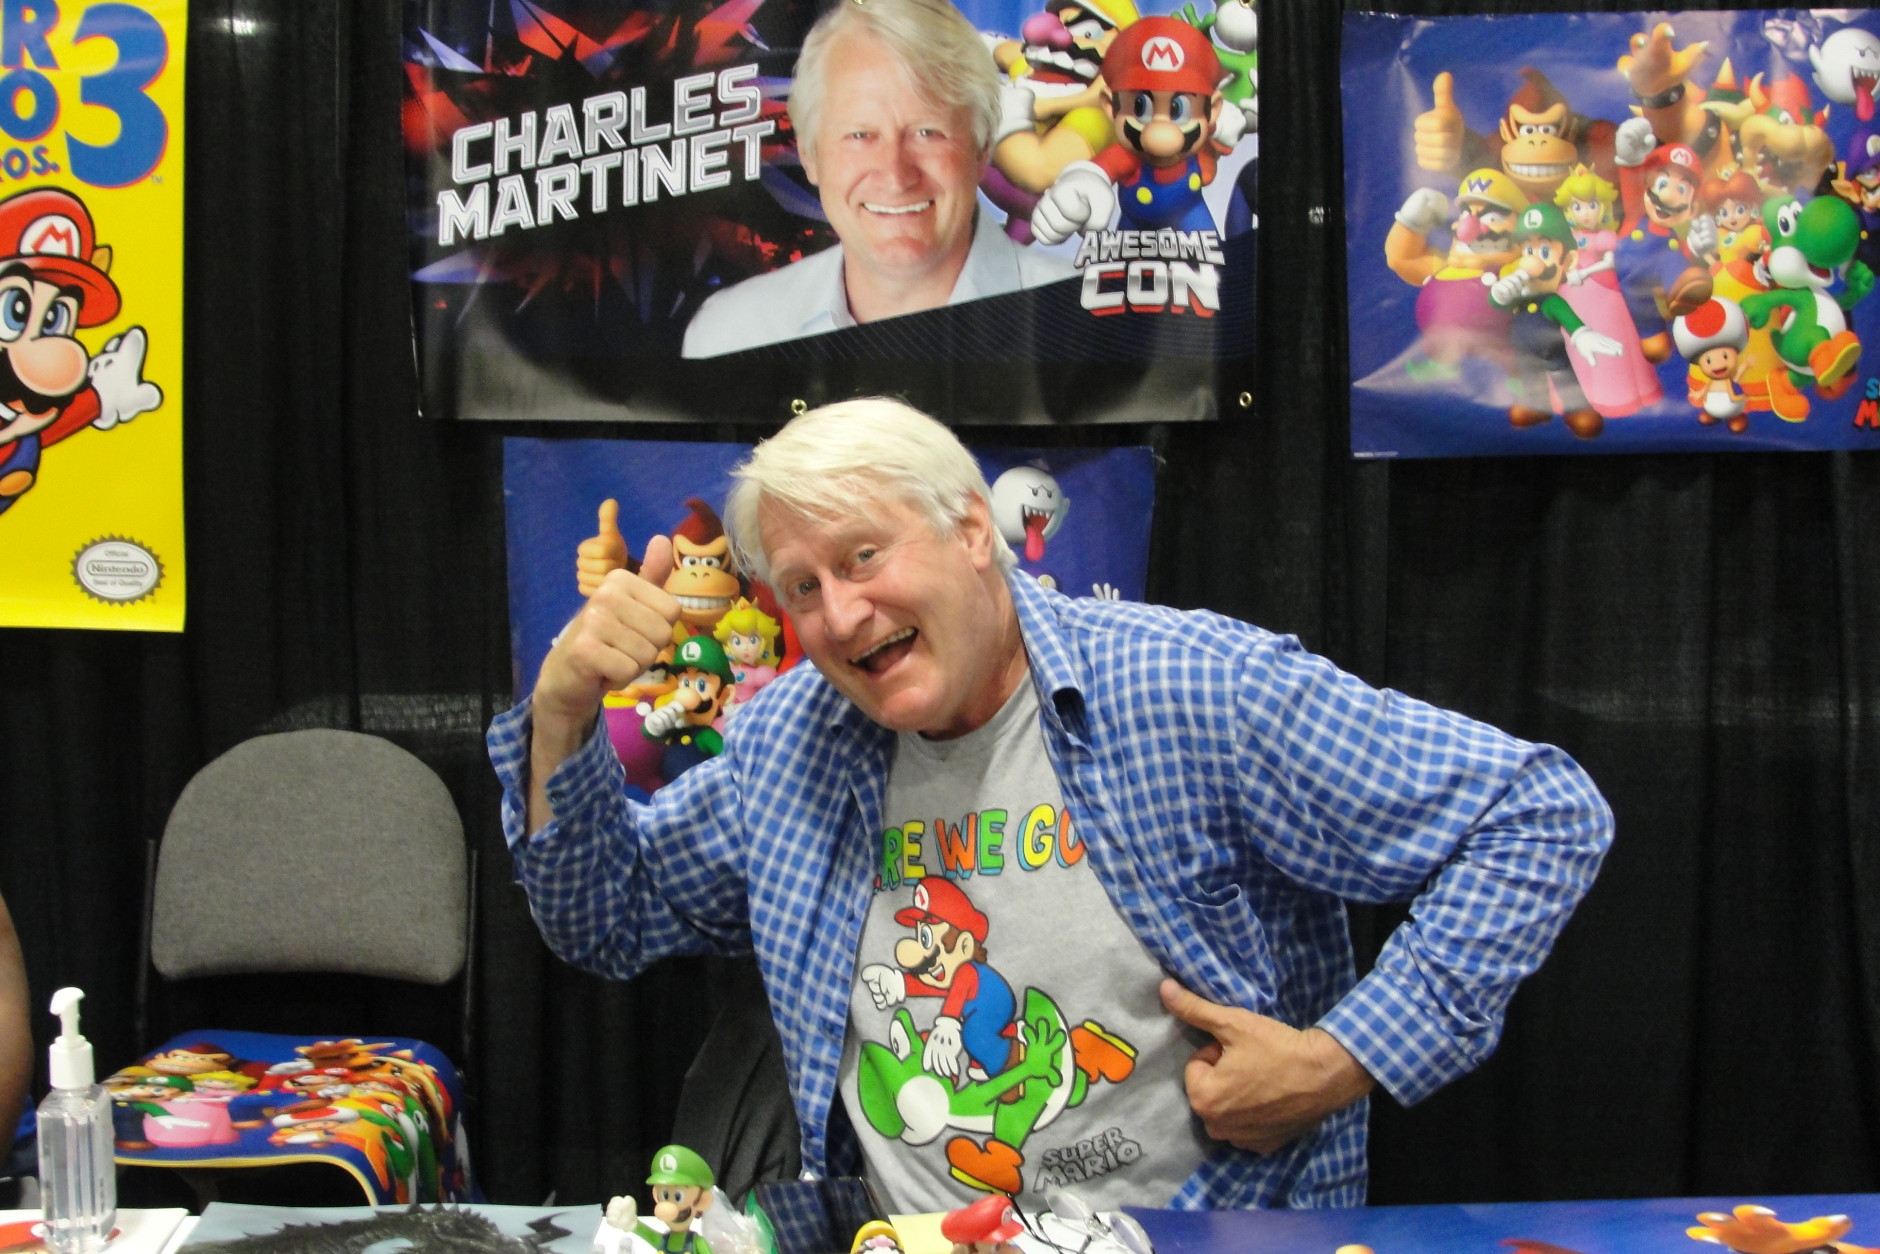 Charles Martinet, the voice of Mario, was at Awesome Con Friday, June 3, 2016. (Maury Winter)